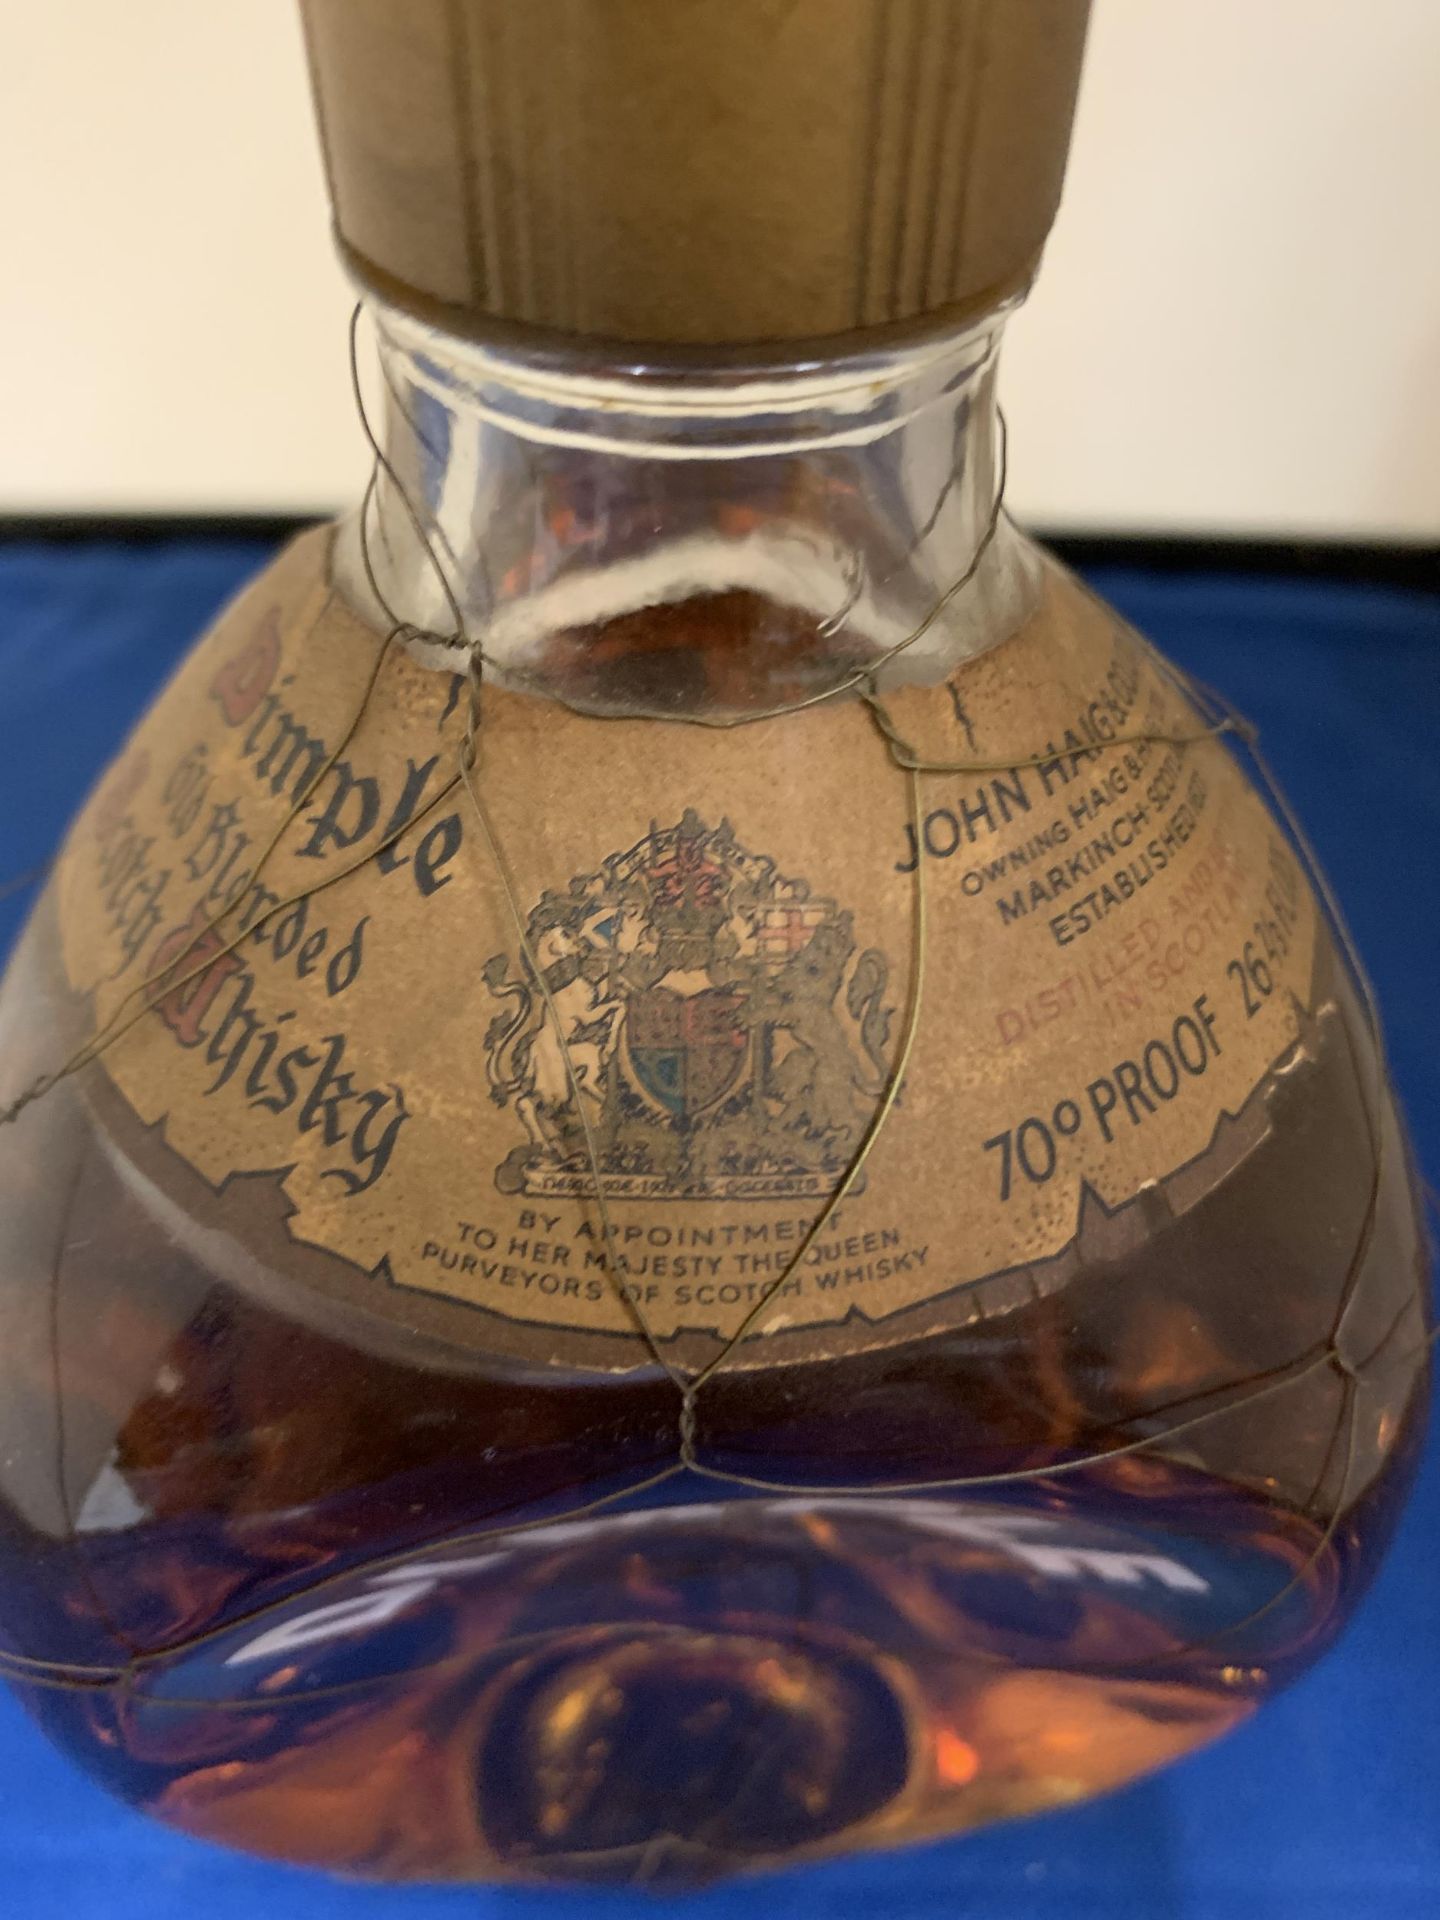 A DIMPLE BOTTLE OF JOHN HAIGH & CO LIMITED WHISKY 70% PROOF - Image 3 of 4